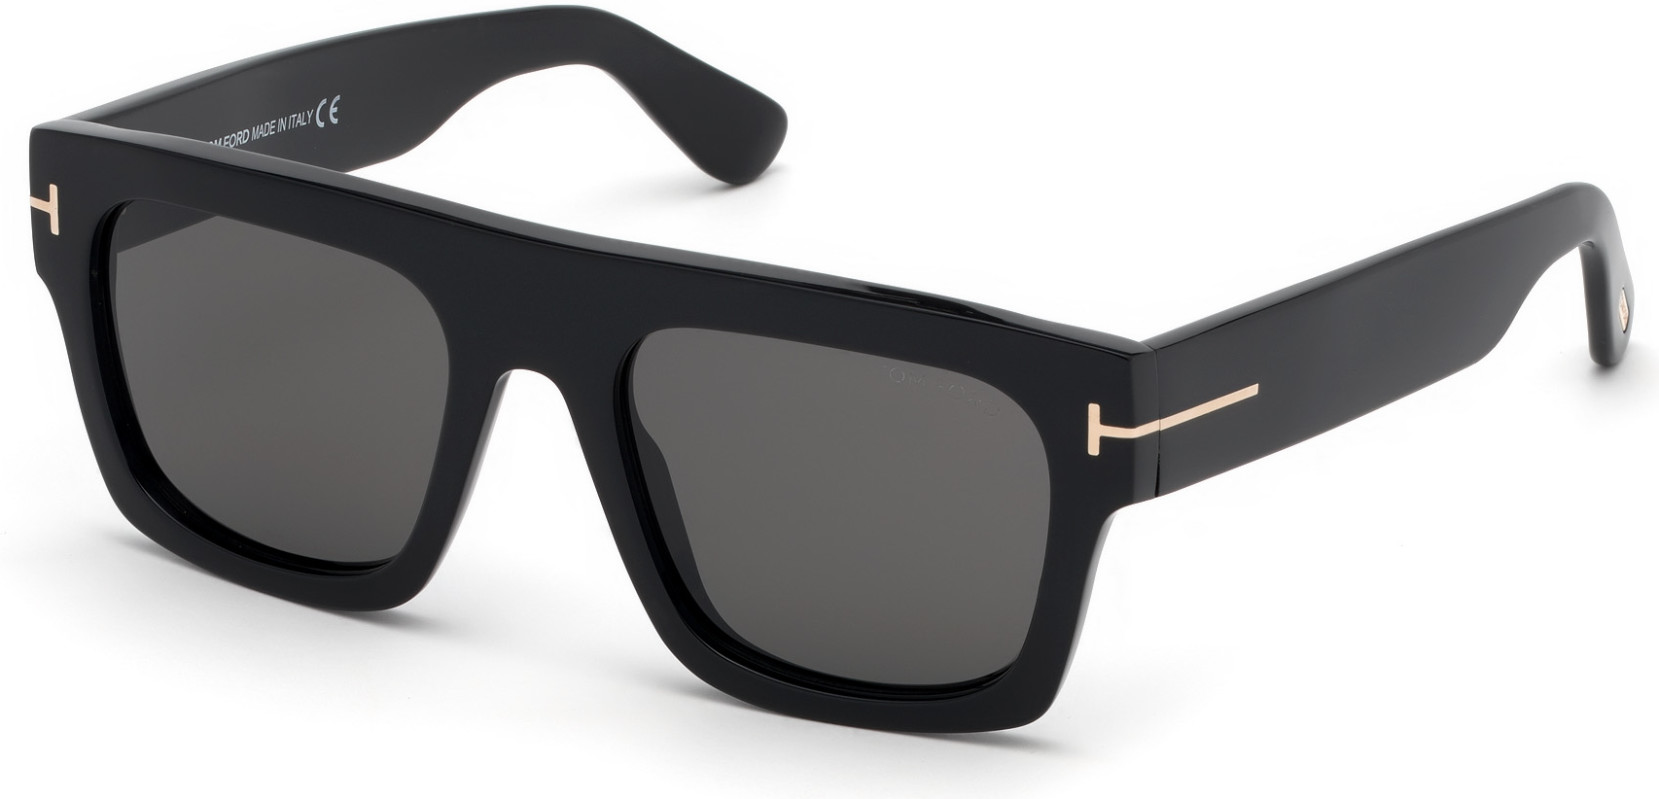 TOM FORD 0711 FAUSTO 01A